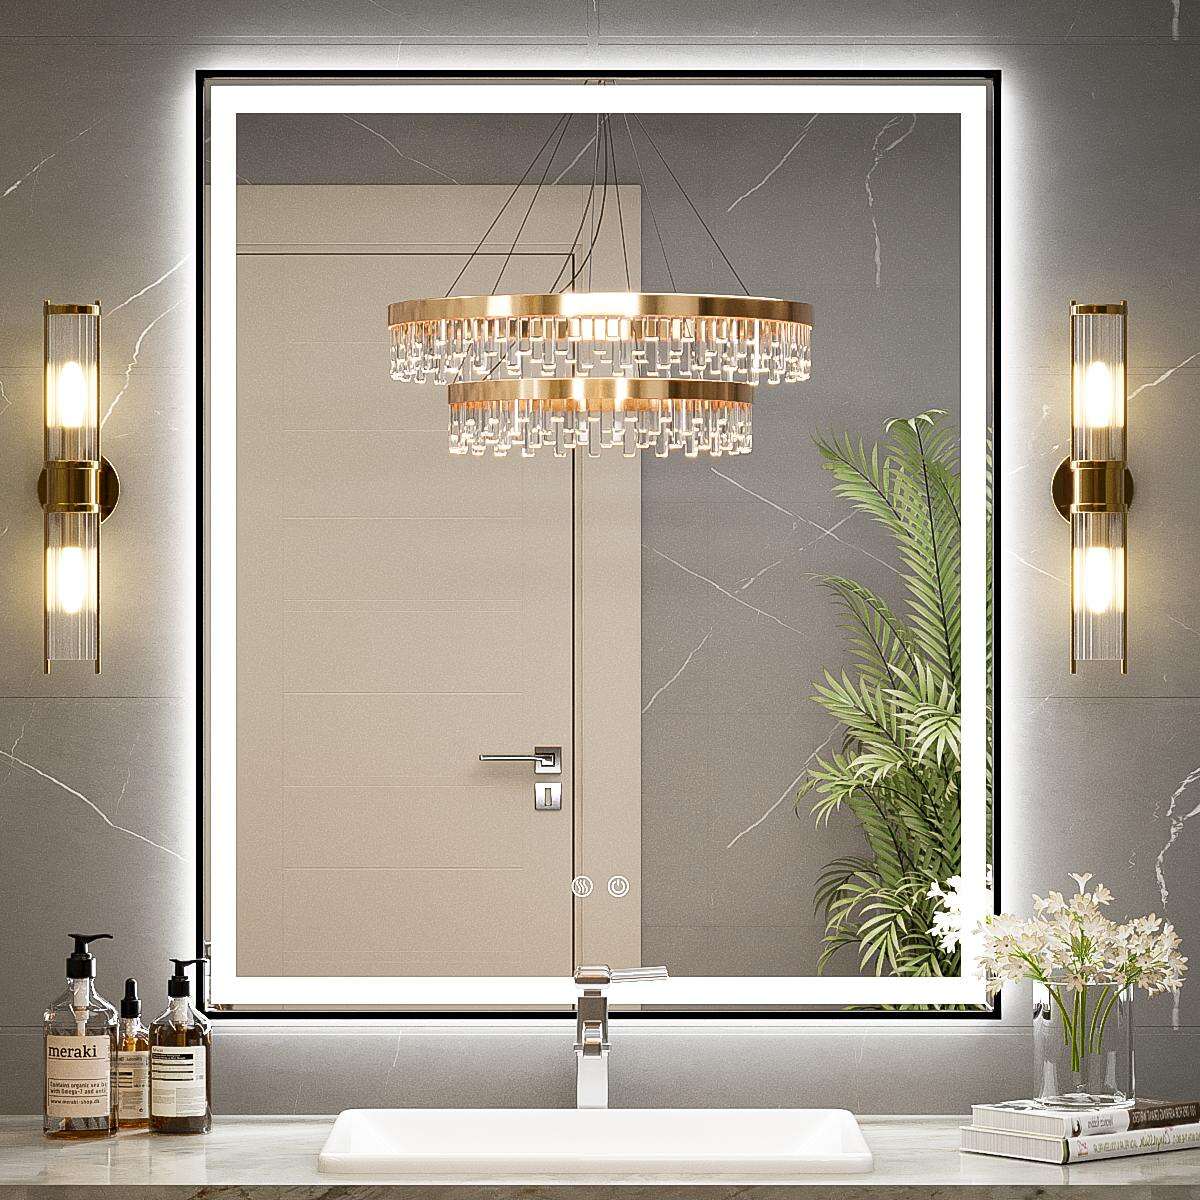 JJGullit bathroom mirror supplier 30x36 Inch LED Bathroom Mirror with Lights, Frontlit and Backlit, Lighted Bathroom Vanity Mirror, Stepless Dimmable, French Cleats Wall Mount Anti-Fog Mirror